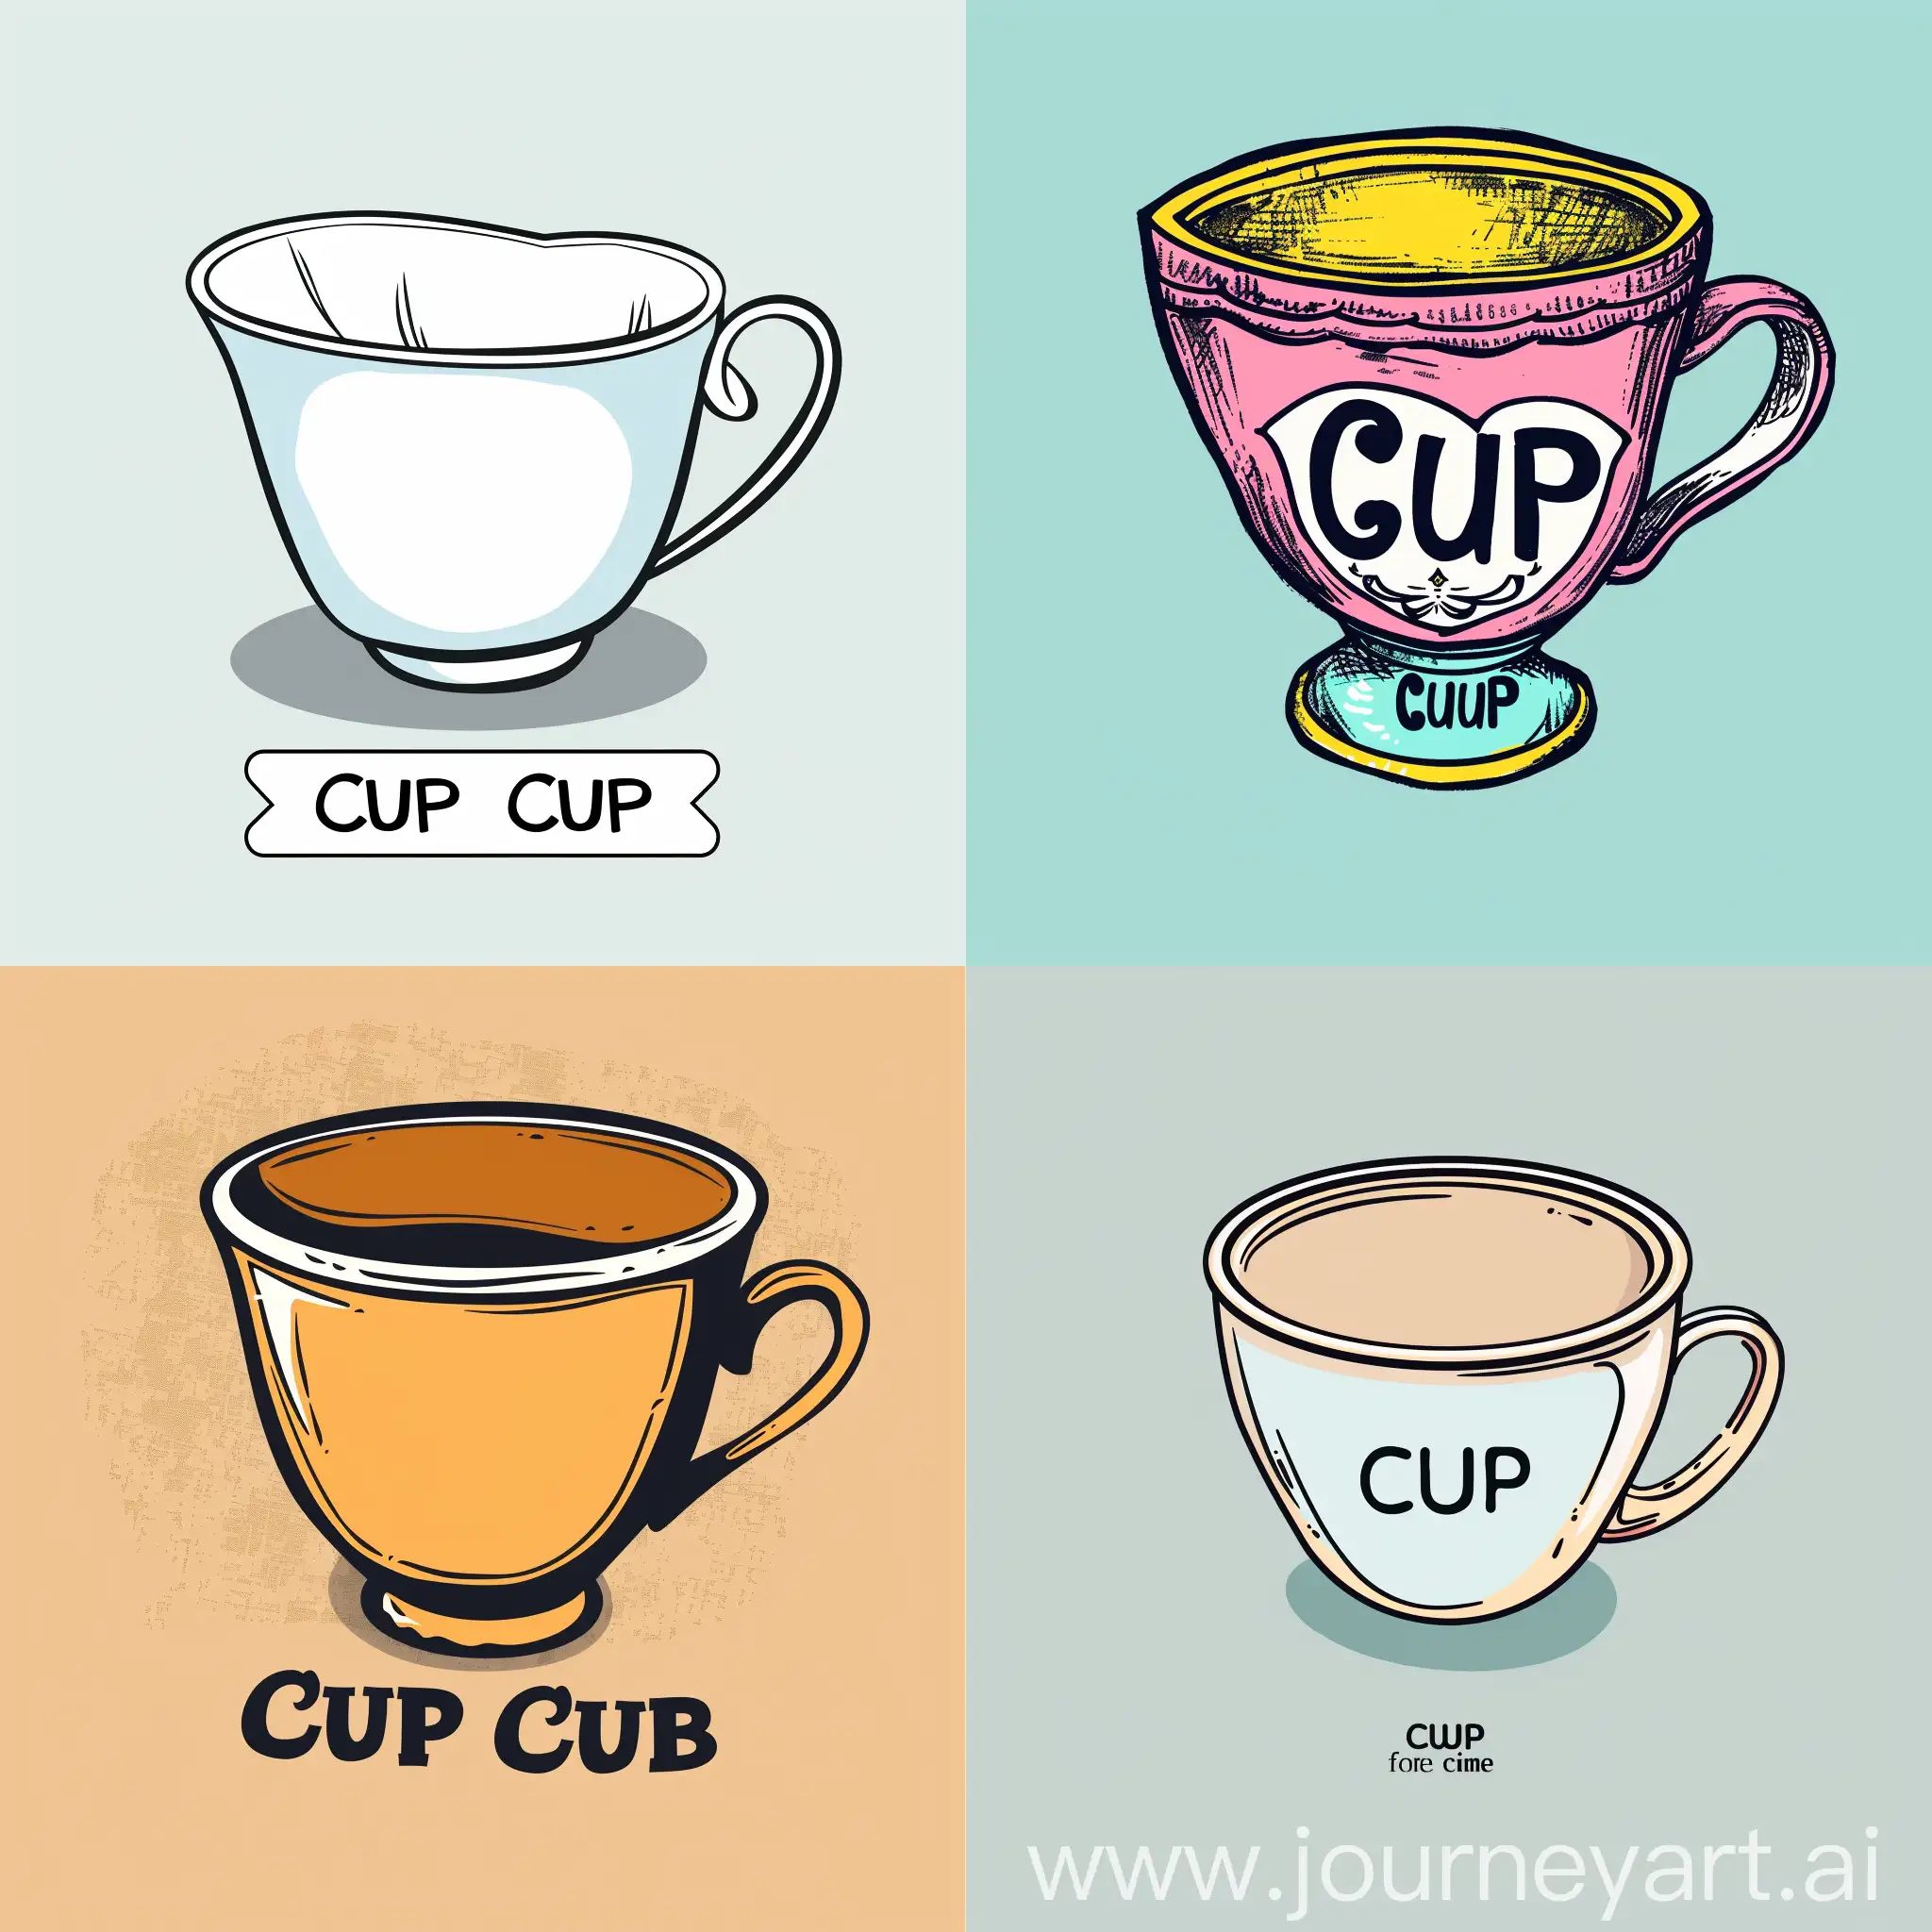 Please help me create a picture, the main body of which is a cup with the words "Cup Cup" marked below the main body. This picture will be used as the avatar for the store's homepage